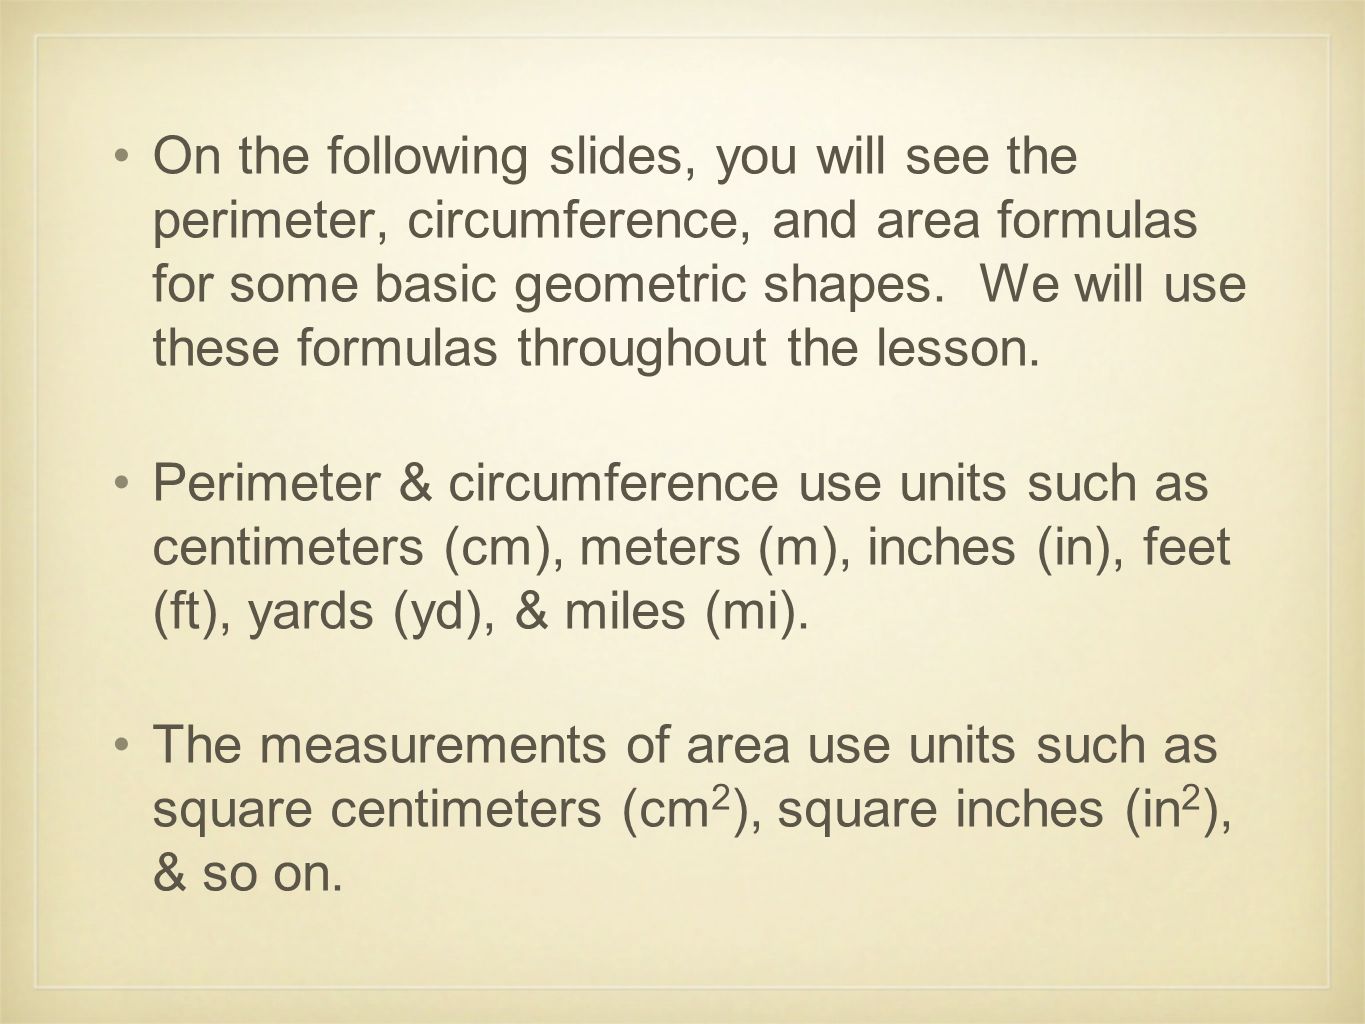 On the following slides, you will see the perimeter, circumference, and area formulas for some basic geometric shapes. We will use these formulas throughout the lesson.